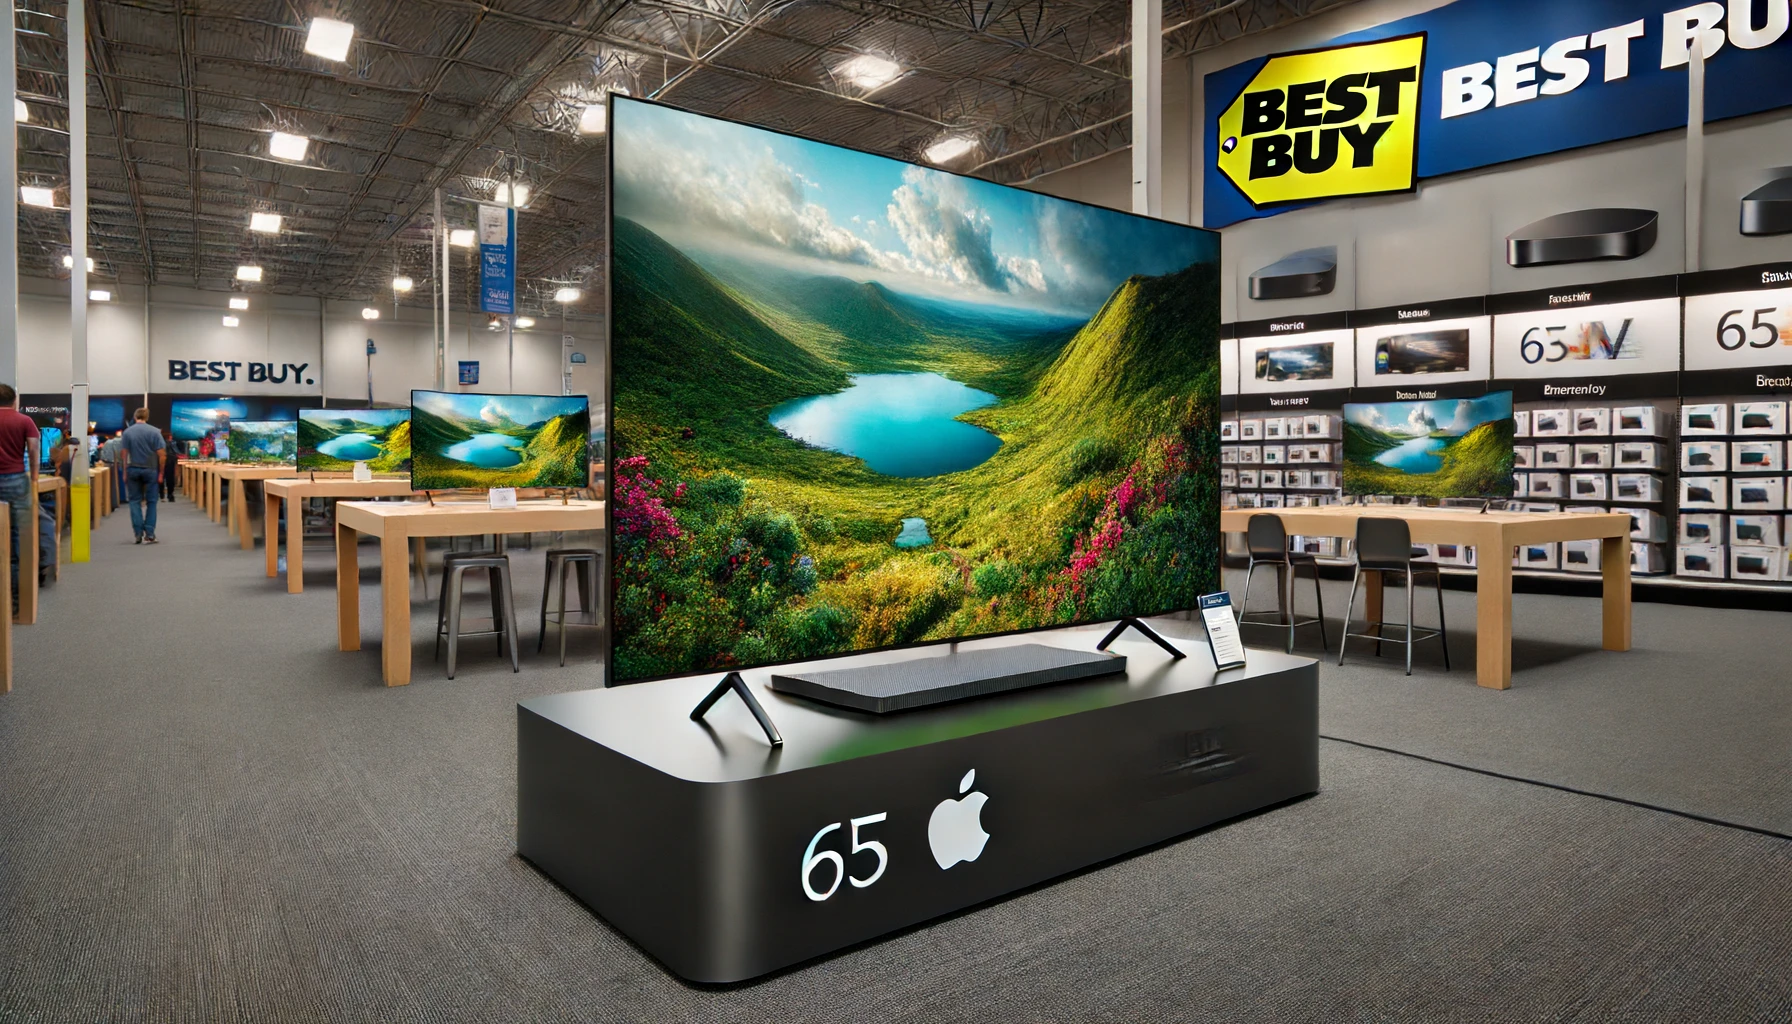 What a 65 inch Apple television set displayed on a Best Buy store stand look like The television has a sleek, minimalist design